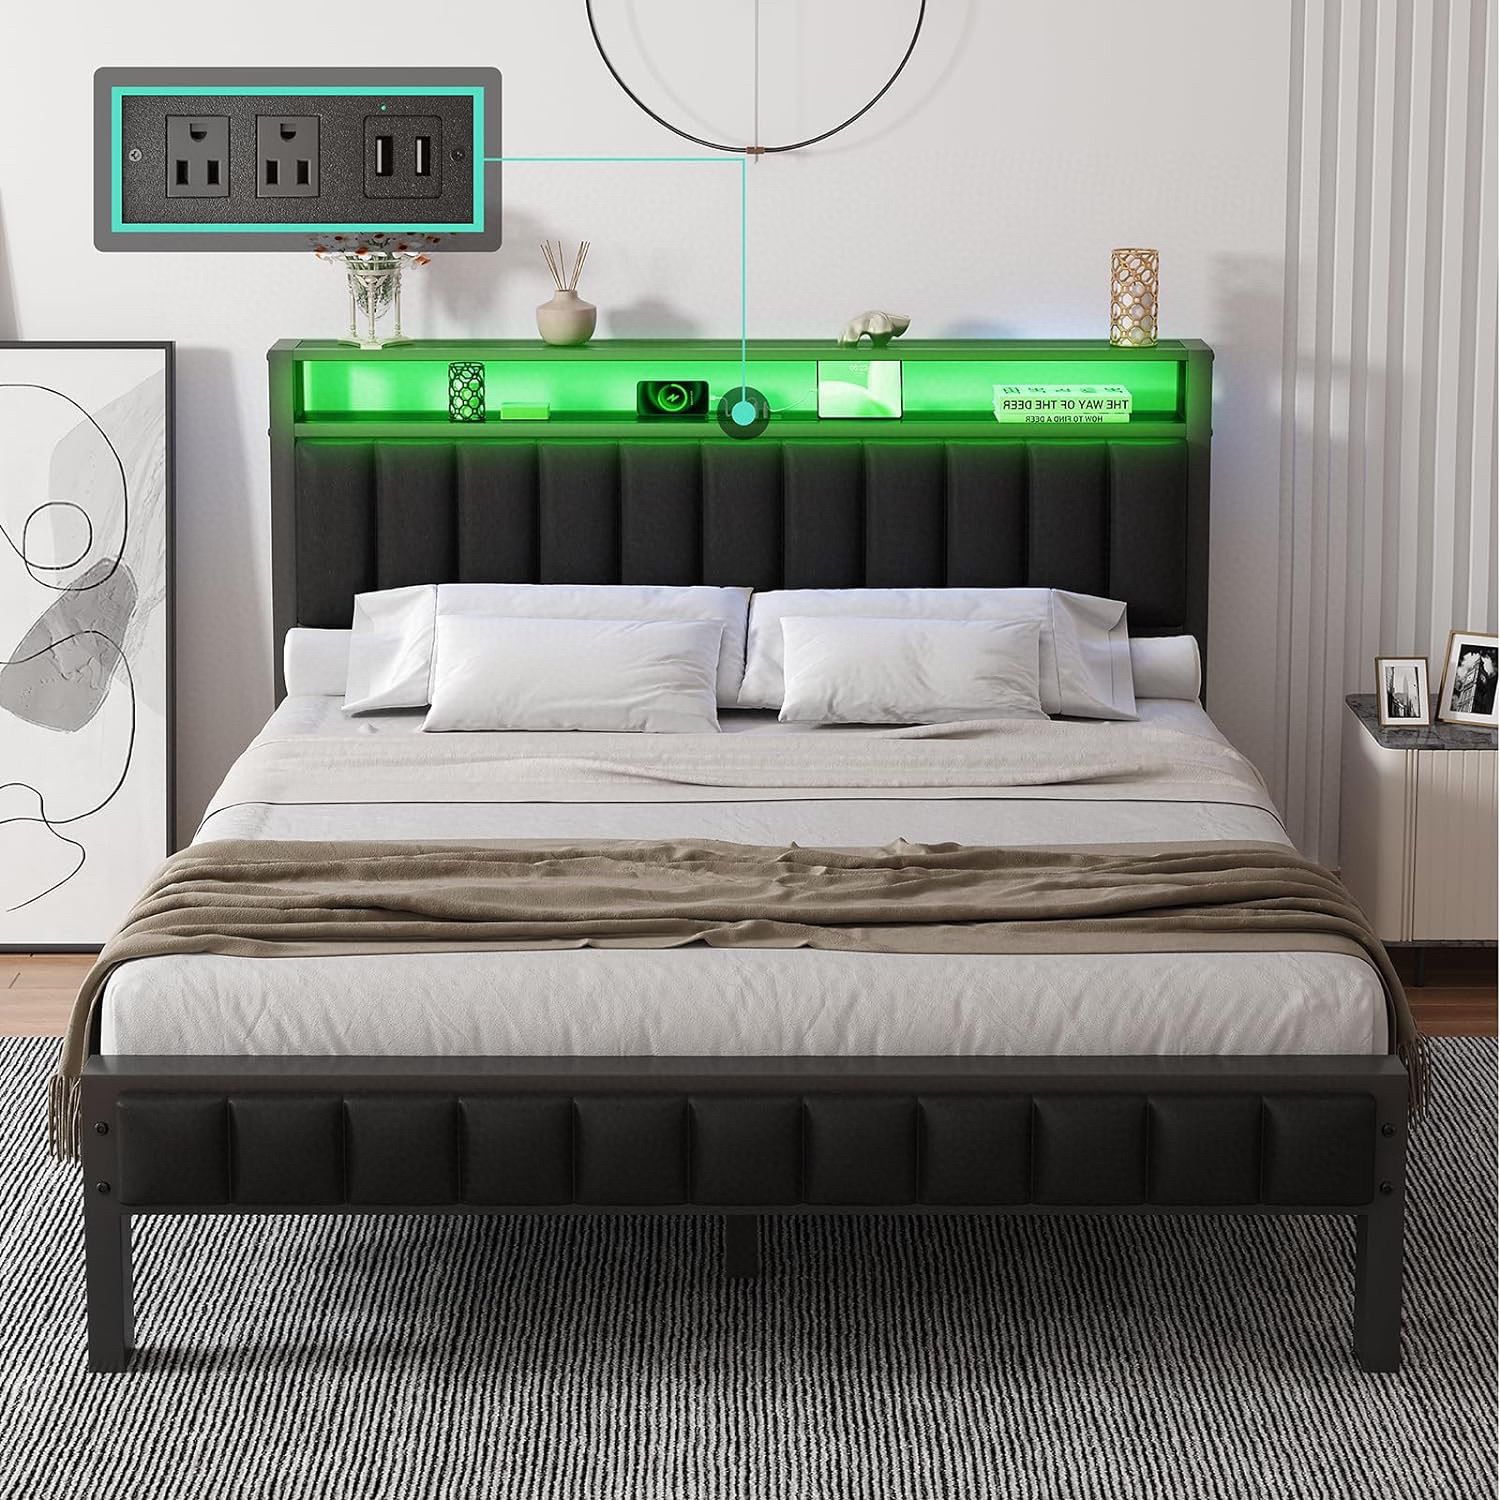 Queen Size Bed Frame with LED Light, Metal Platform Bed with PU Leather Headboard, 2-Tier Storage Space, Charging Station